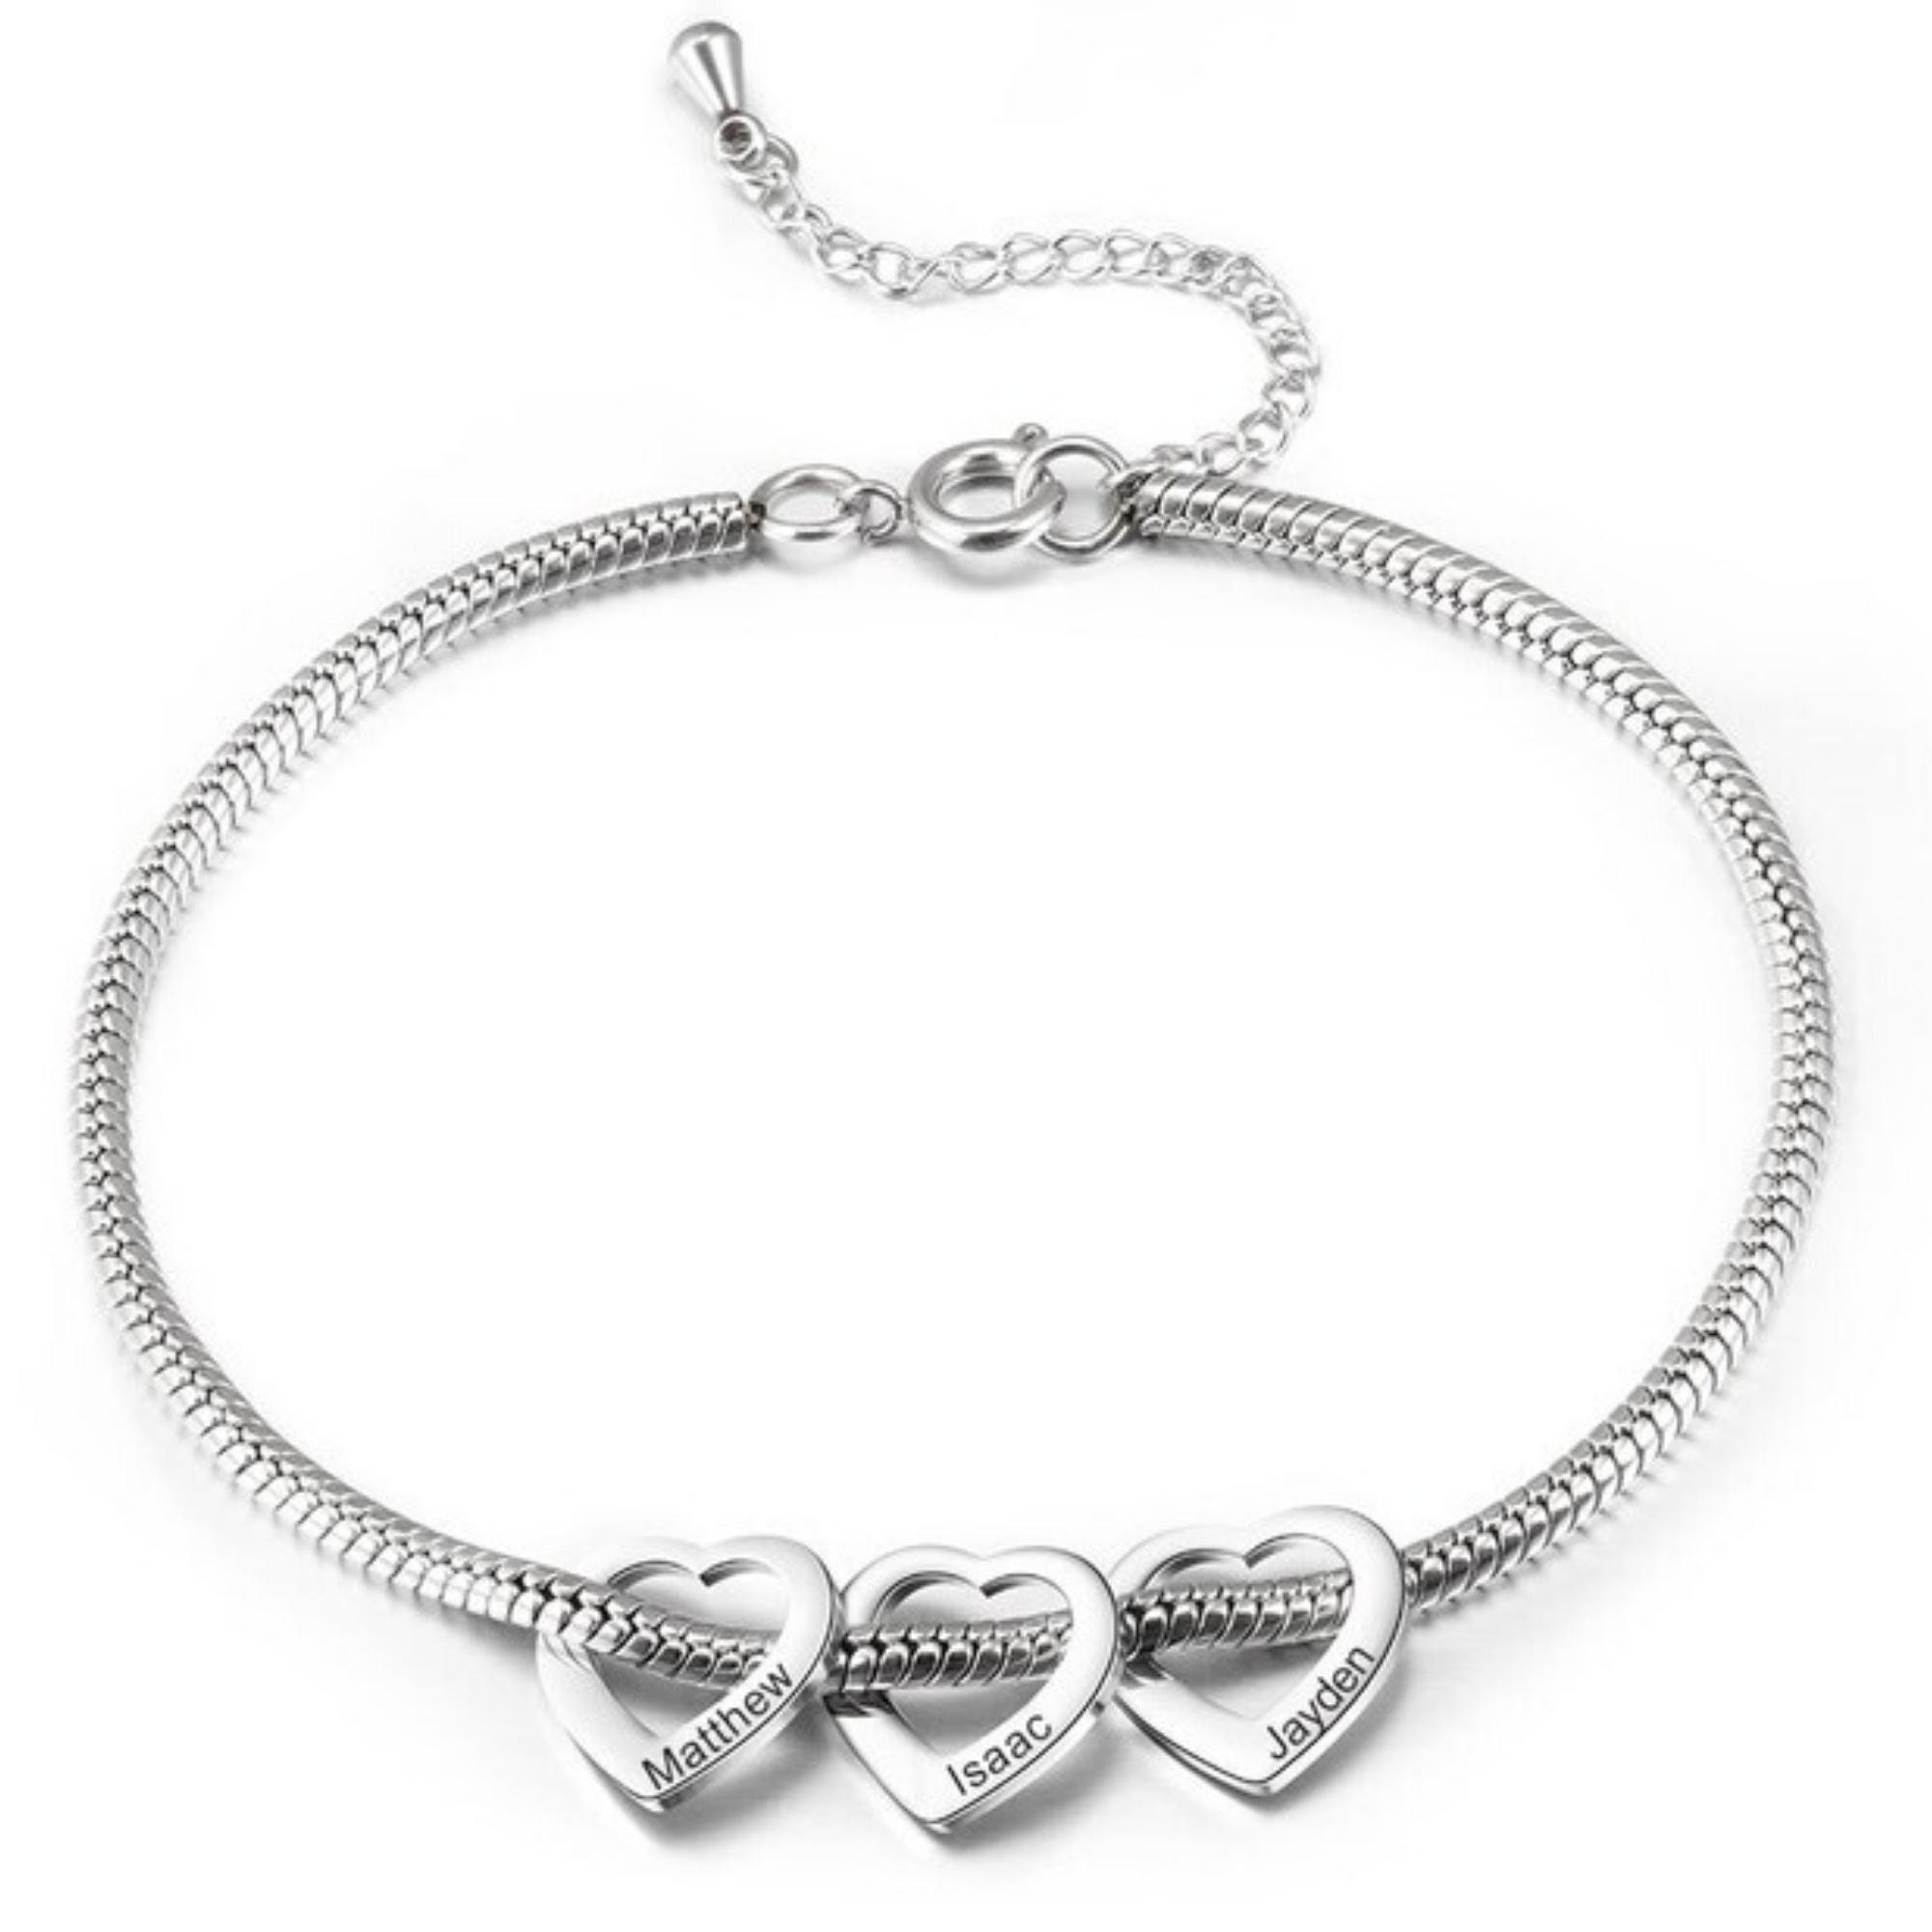 Personalized Hearts Bracelet for Mom with Kids Names